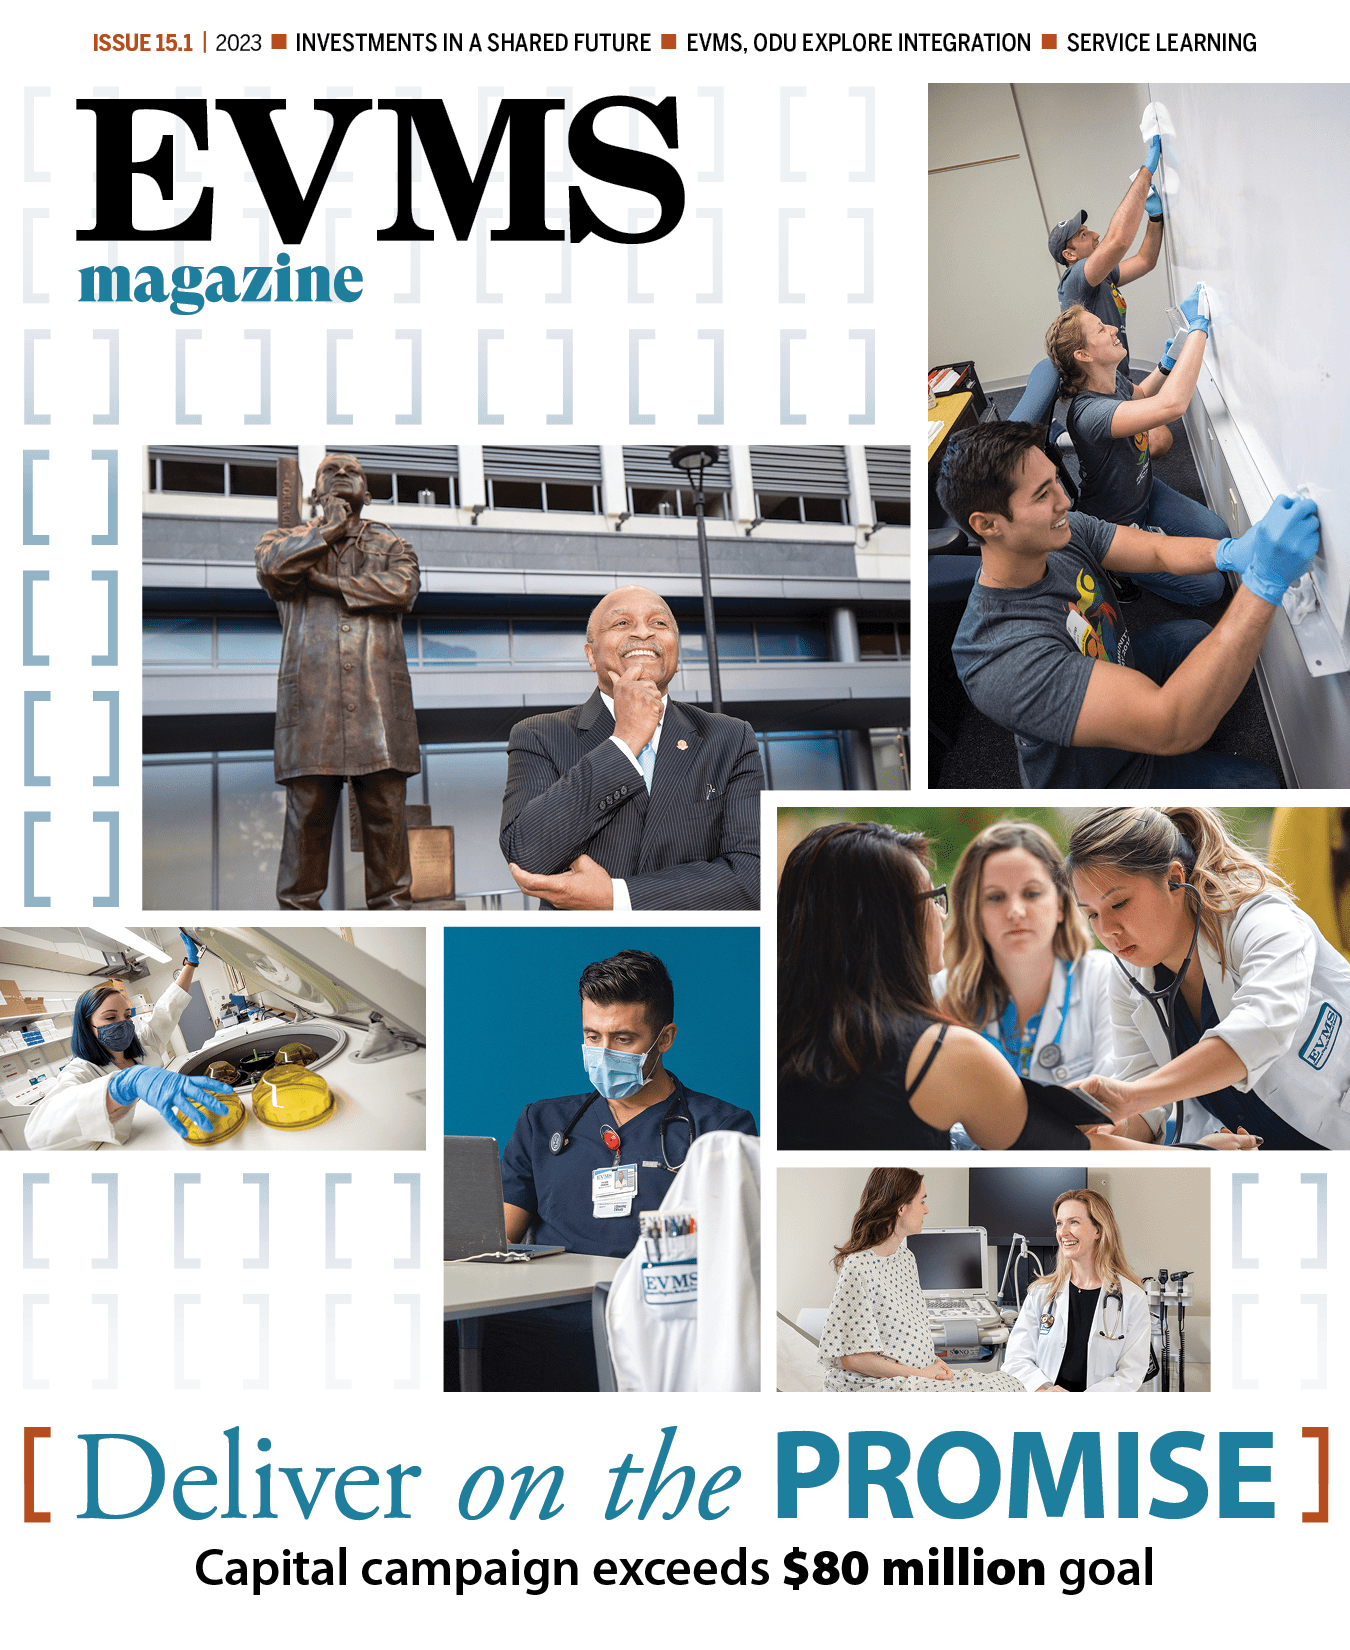 EVMS Magazine - 15.1 - 2022/2023 - Deliver on the Promise